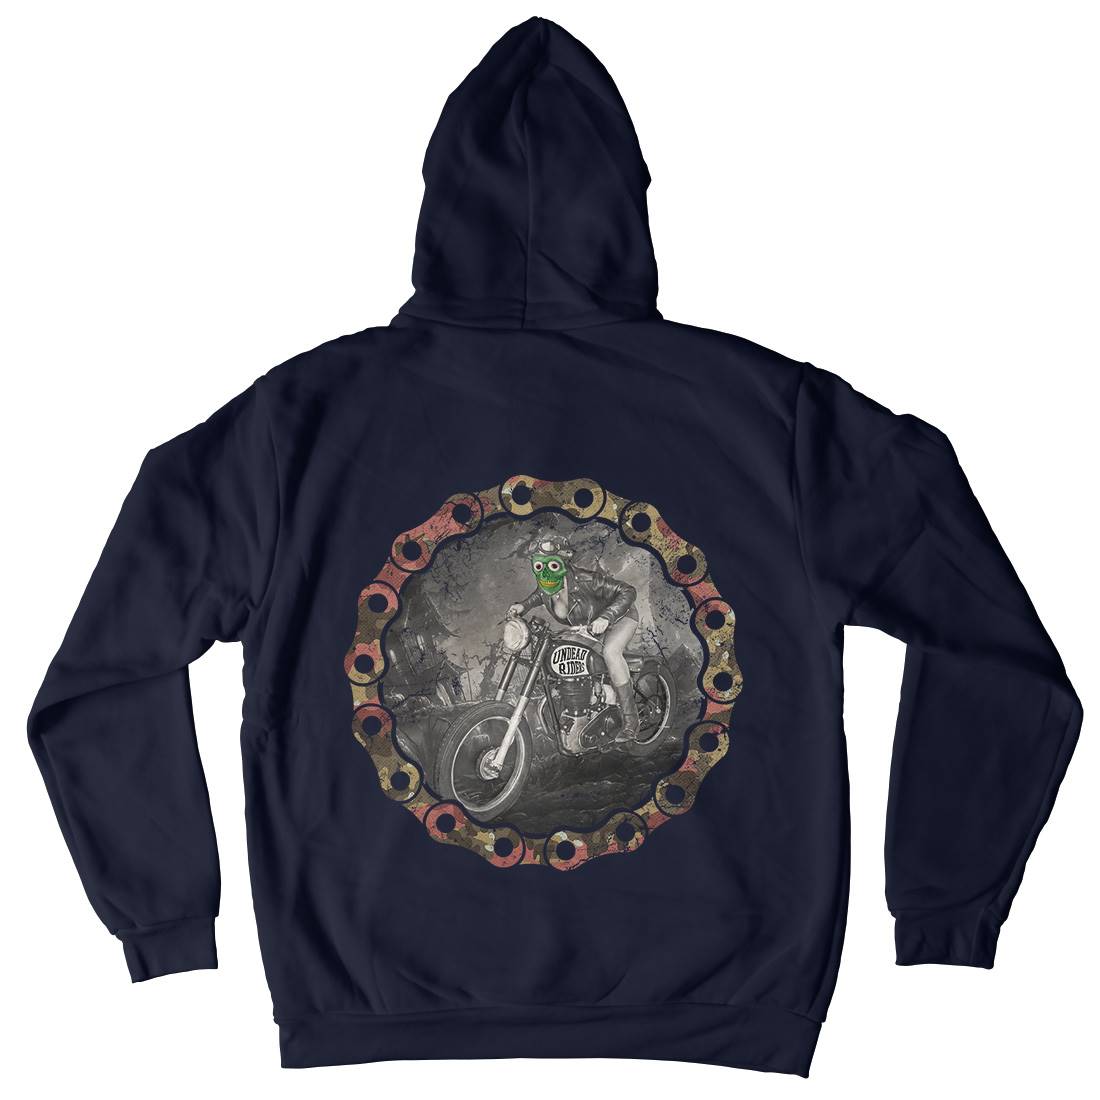 Undead Riders Kids Crew Neck Hoodie Motorcycles A937